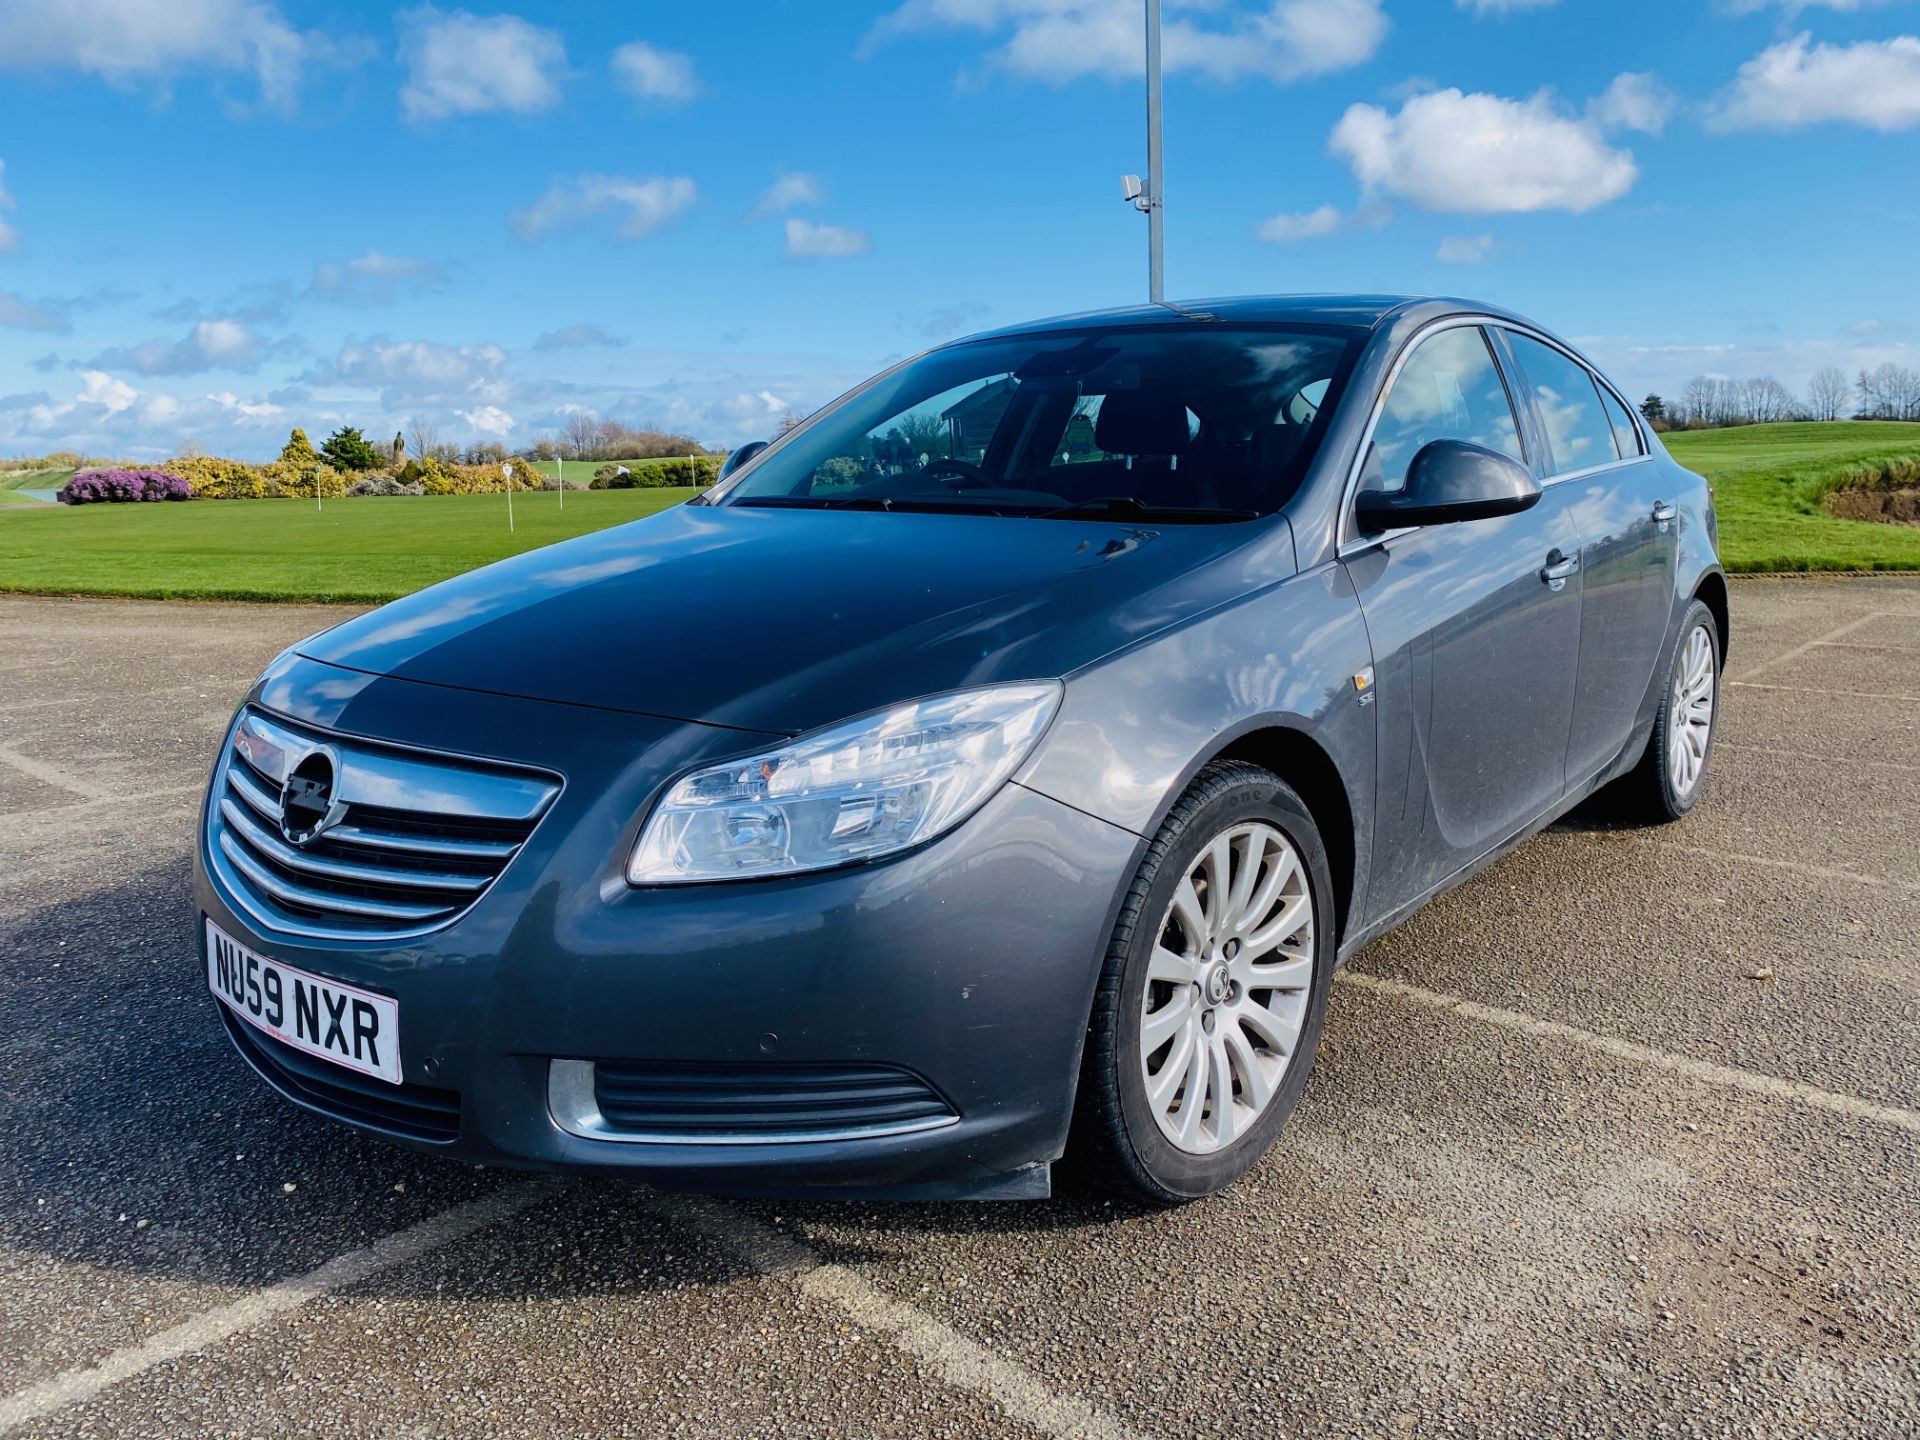 (ON SALE) VAUXHALL INSIGNIA 2.0CDTI "SE" 5 DOOR HATCHBACK - LEATHER - AIR CON - LOW MILES - NO VAT - Image 4 of 30